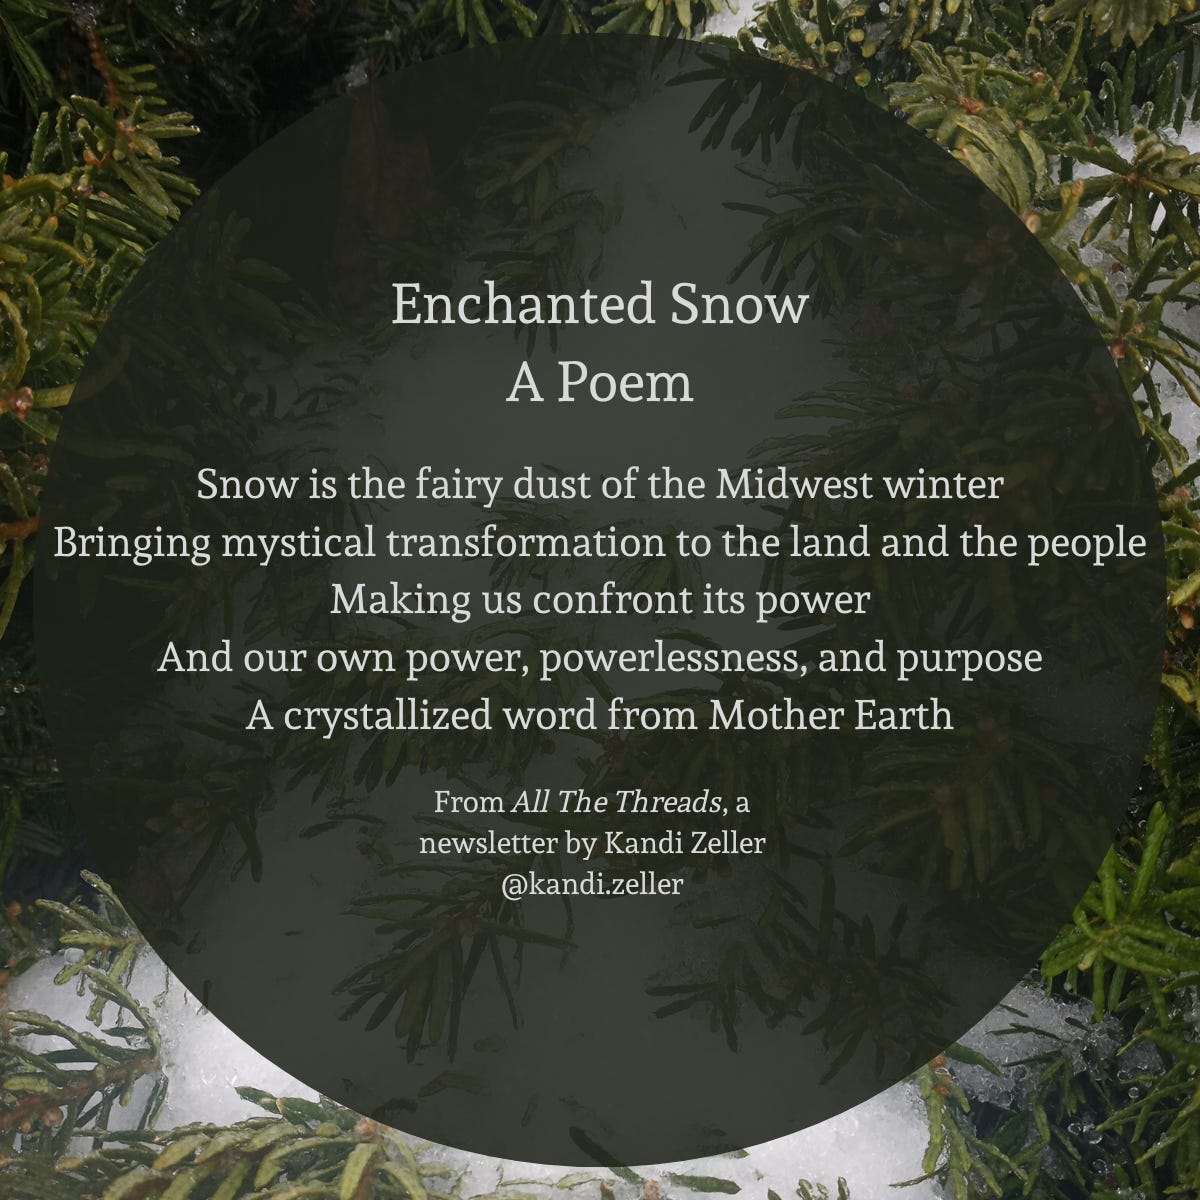 A background of a green bush, covered with patchy snow. On top of the background is a somewhat transparent black circle. On the black circle is white lettering that reads, “Enchanted Snow: A Poem…Snow is the fairy dust of the Midwest winter / Bringing mystical transformation to the land and the people / Making us confront its power / And our own power, powerlessness, and purpose / A crystallized word from Mother Earth… From All The Threads, a newsletter by Kandi Zeller @kandi.zeller"